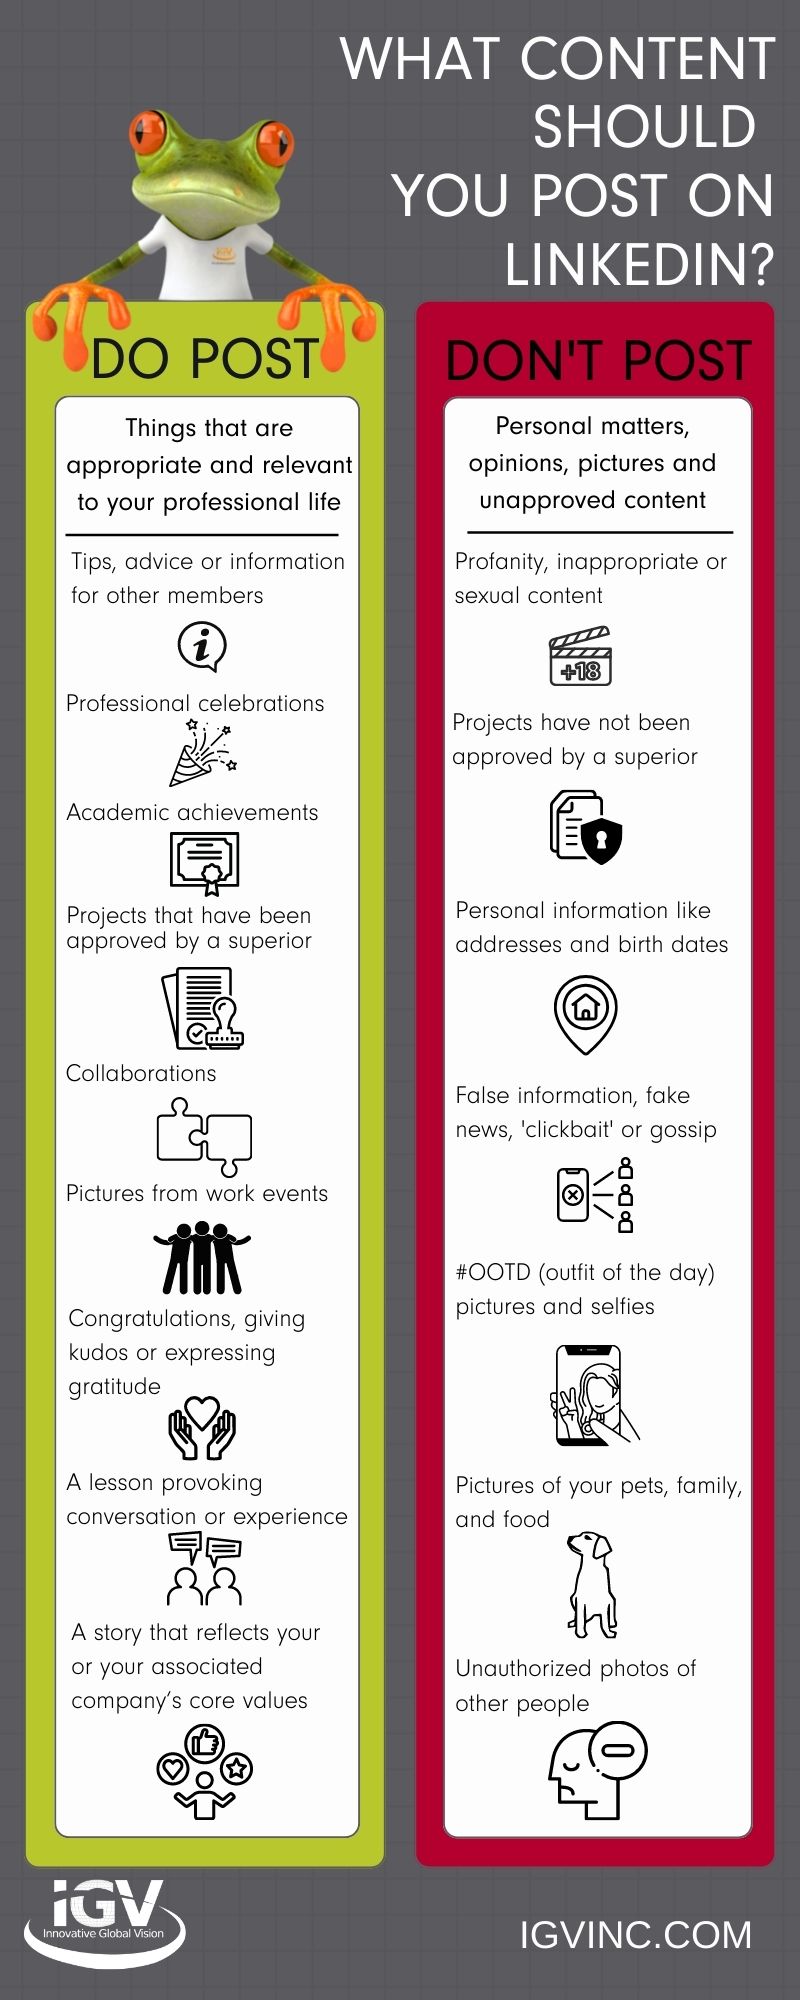 infographic outlining the do's and don'ts of posting on LinkedIn